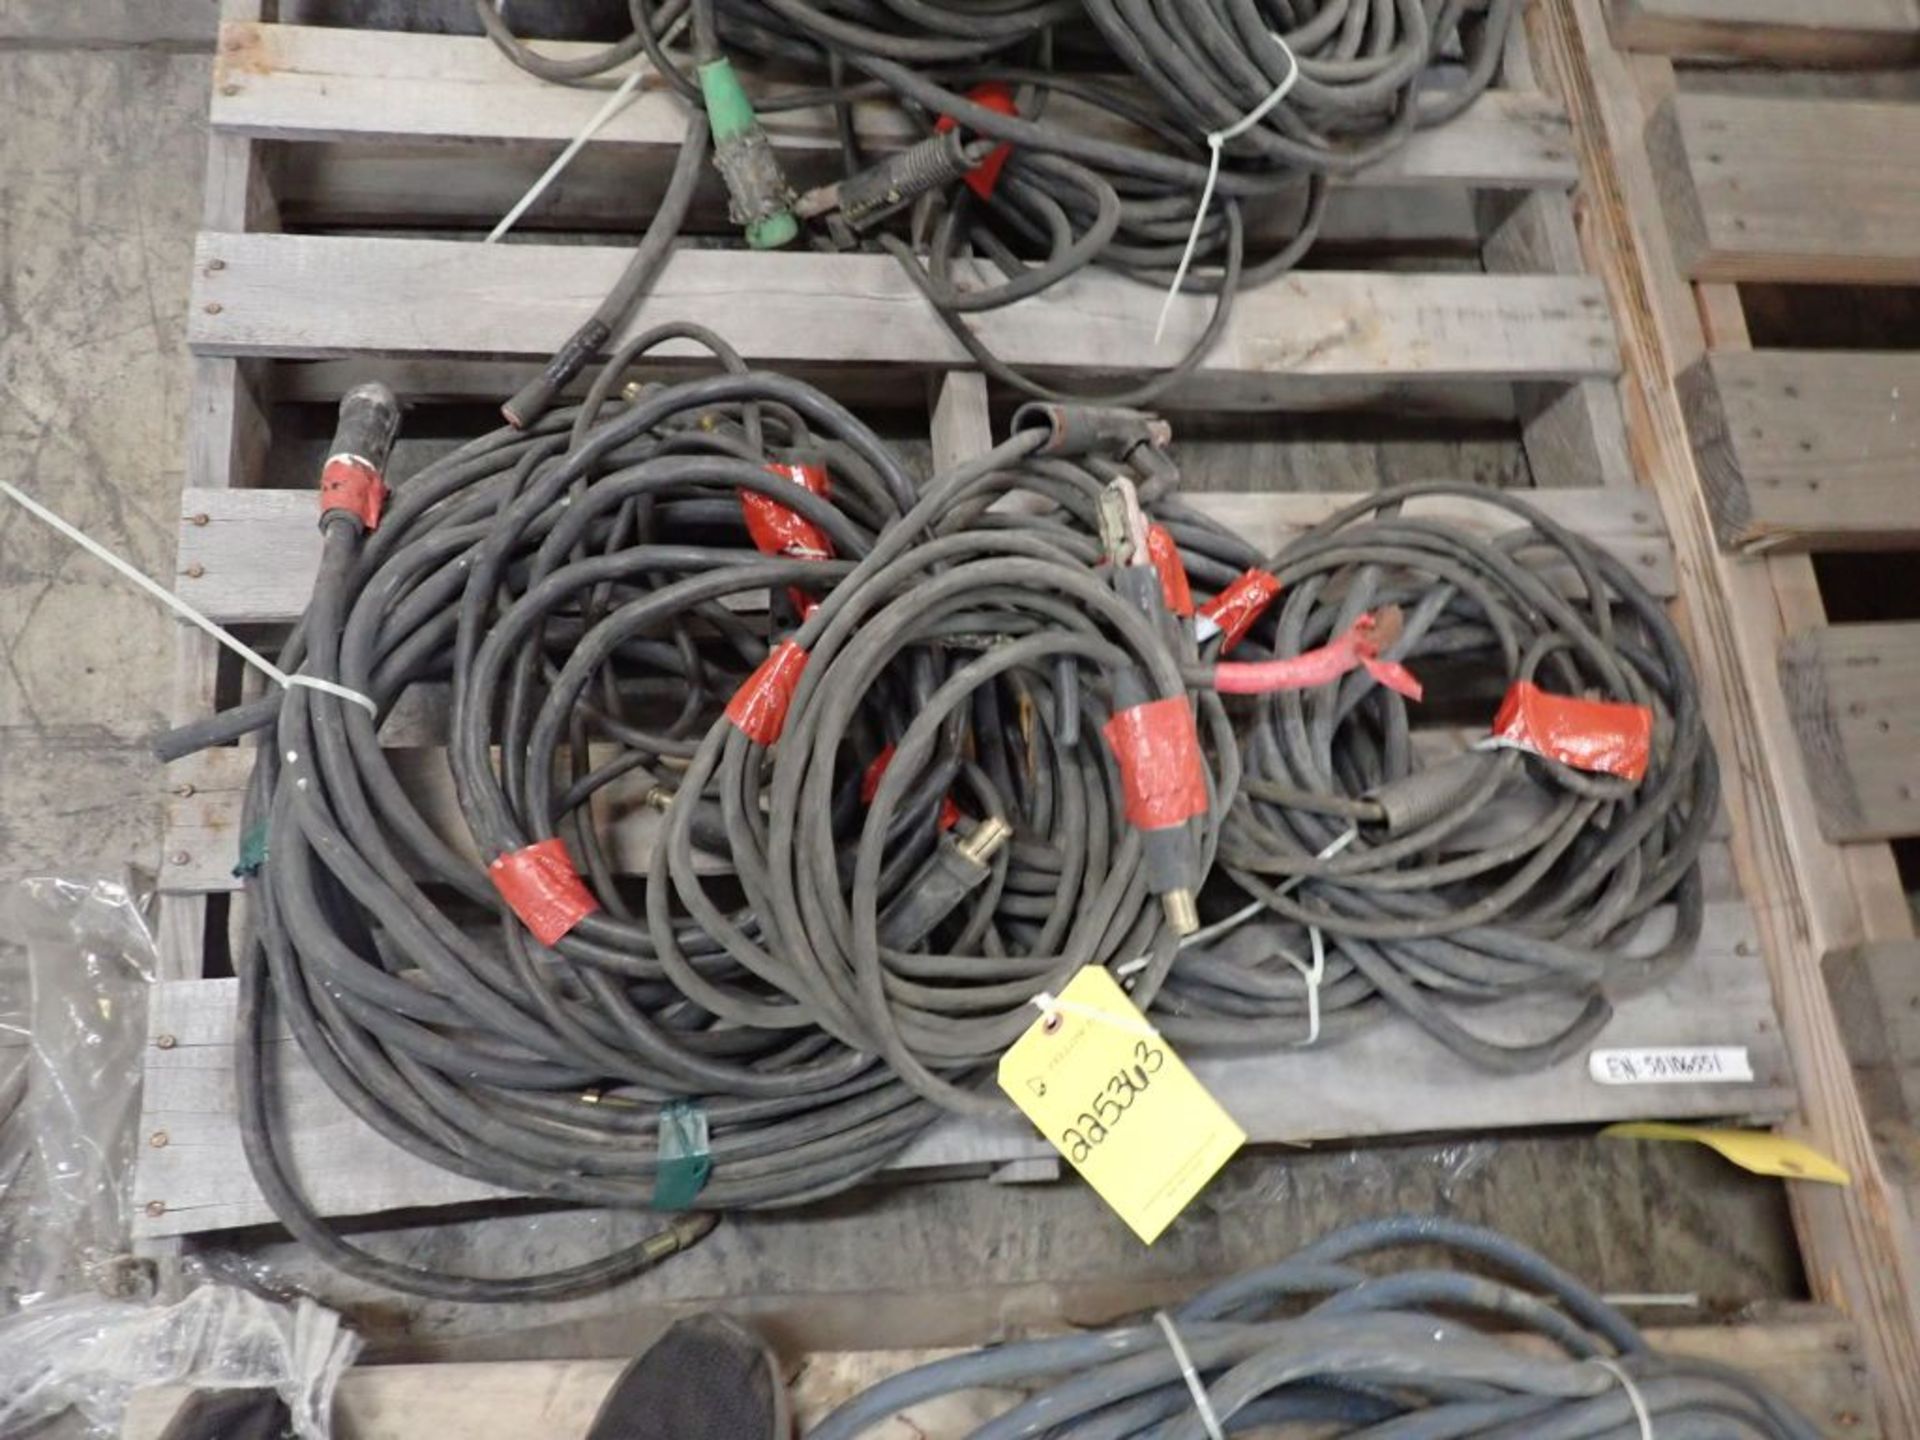 Lot of Assorted Welding Leads|80 lbs; Tag: 225363